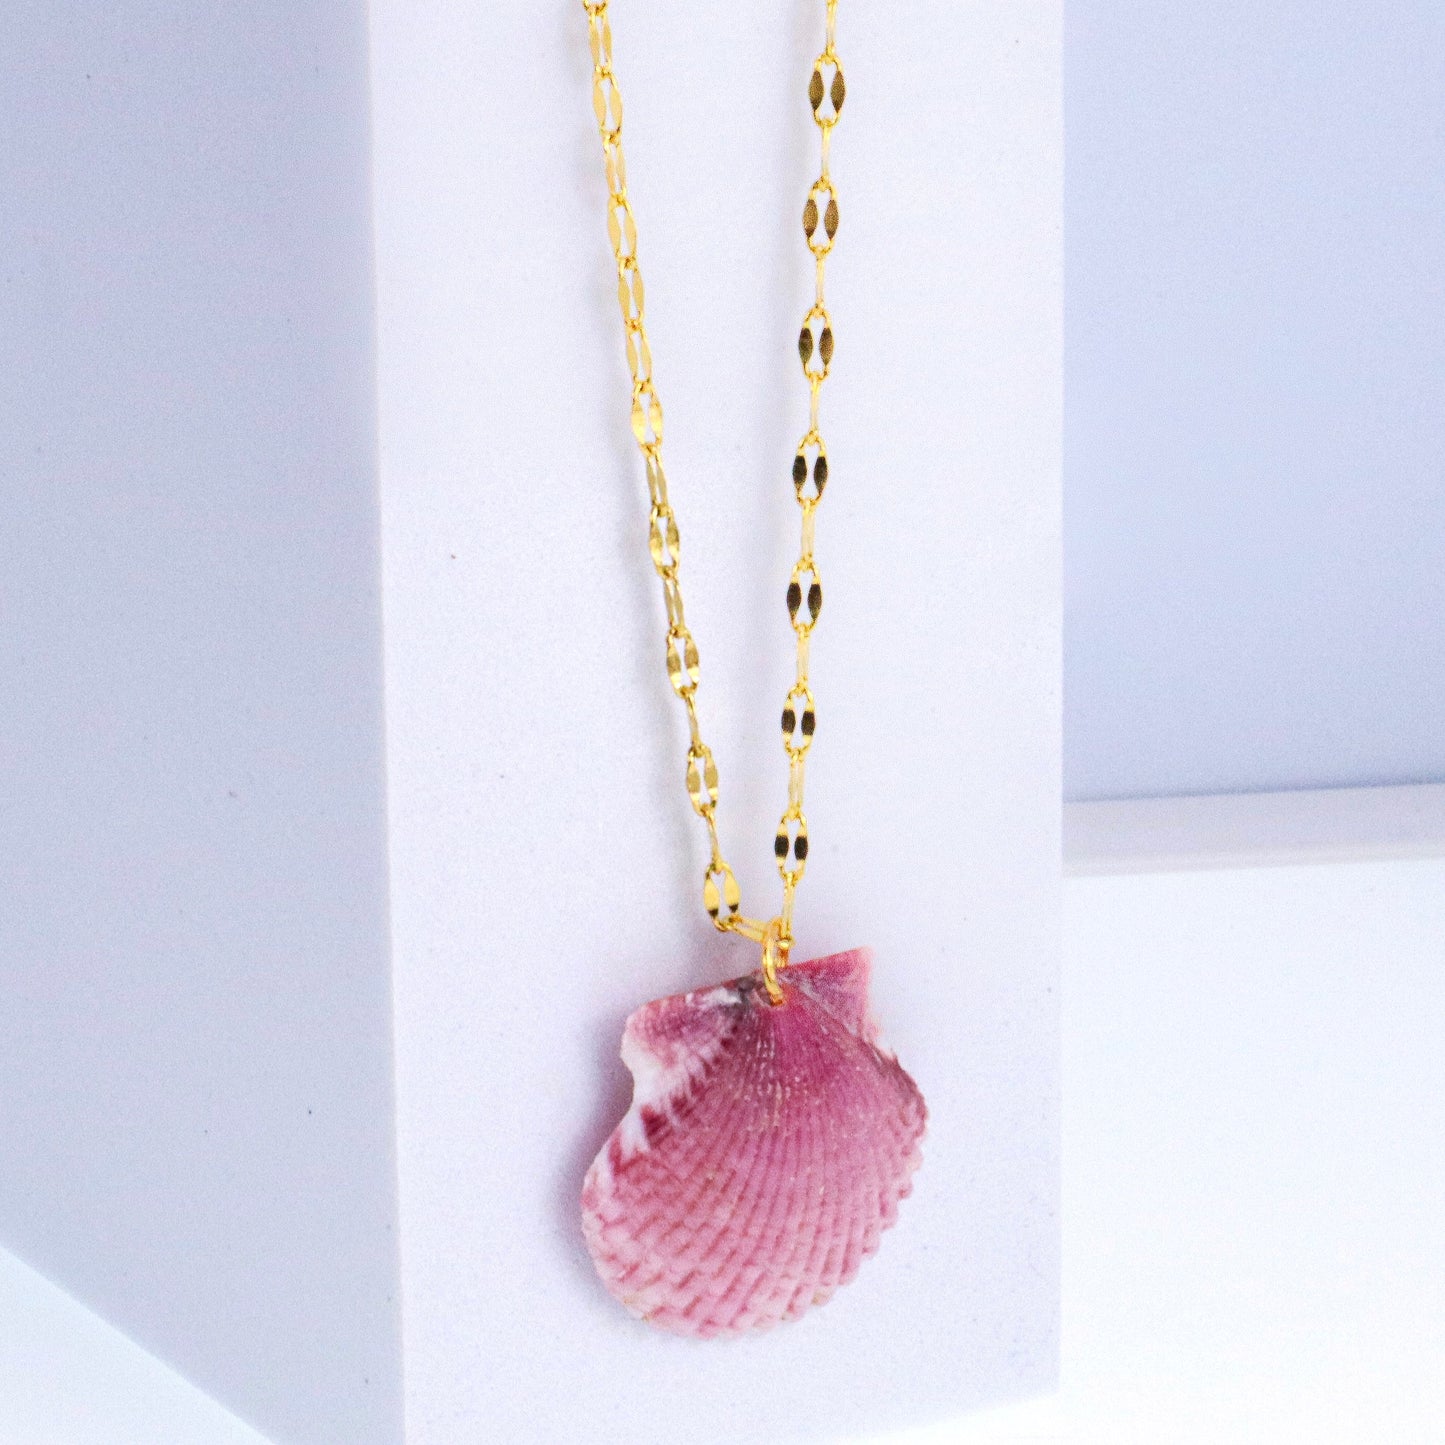 Calico Scallop Shell & 14k Gold over Stainless Steel Necklace